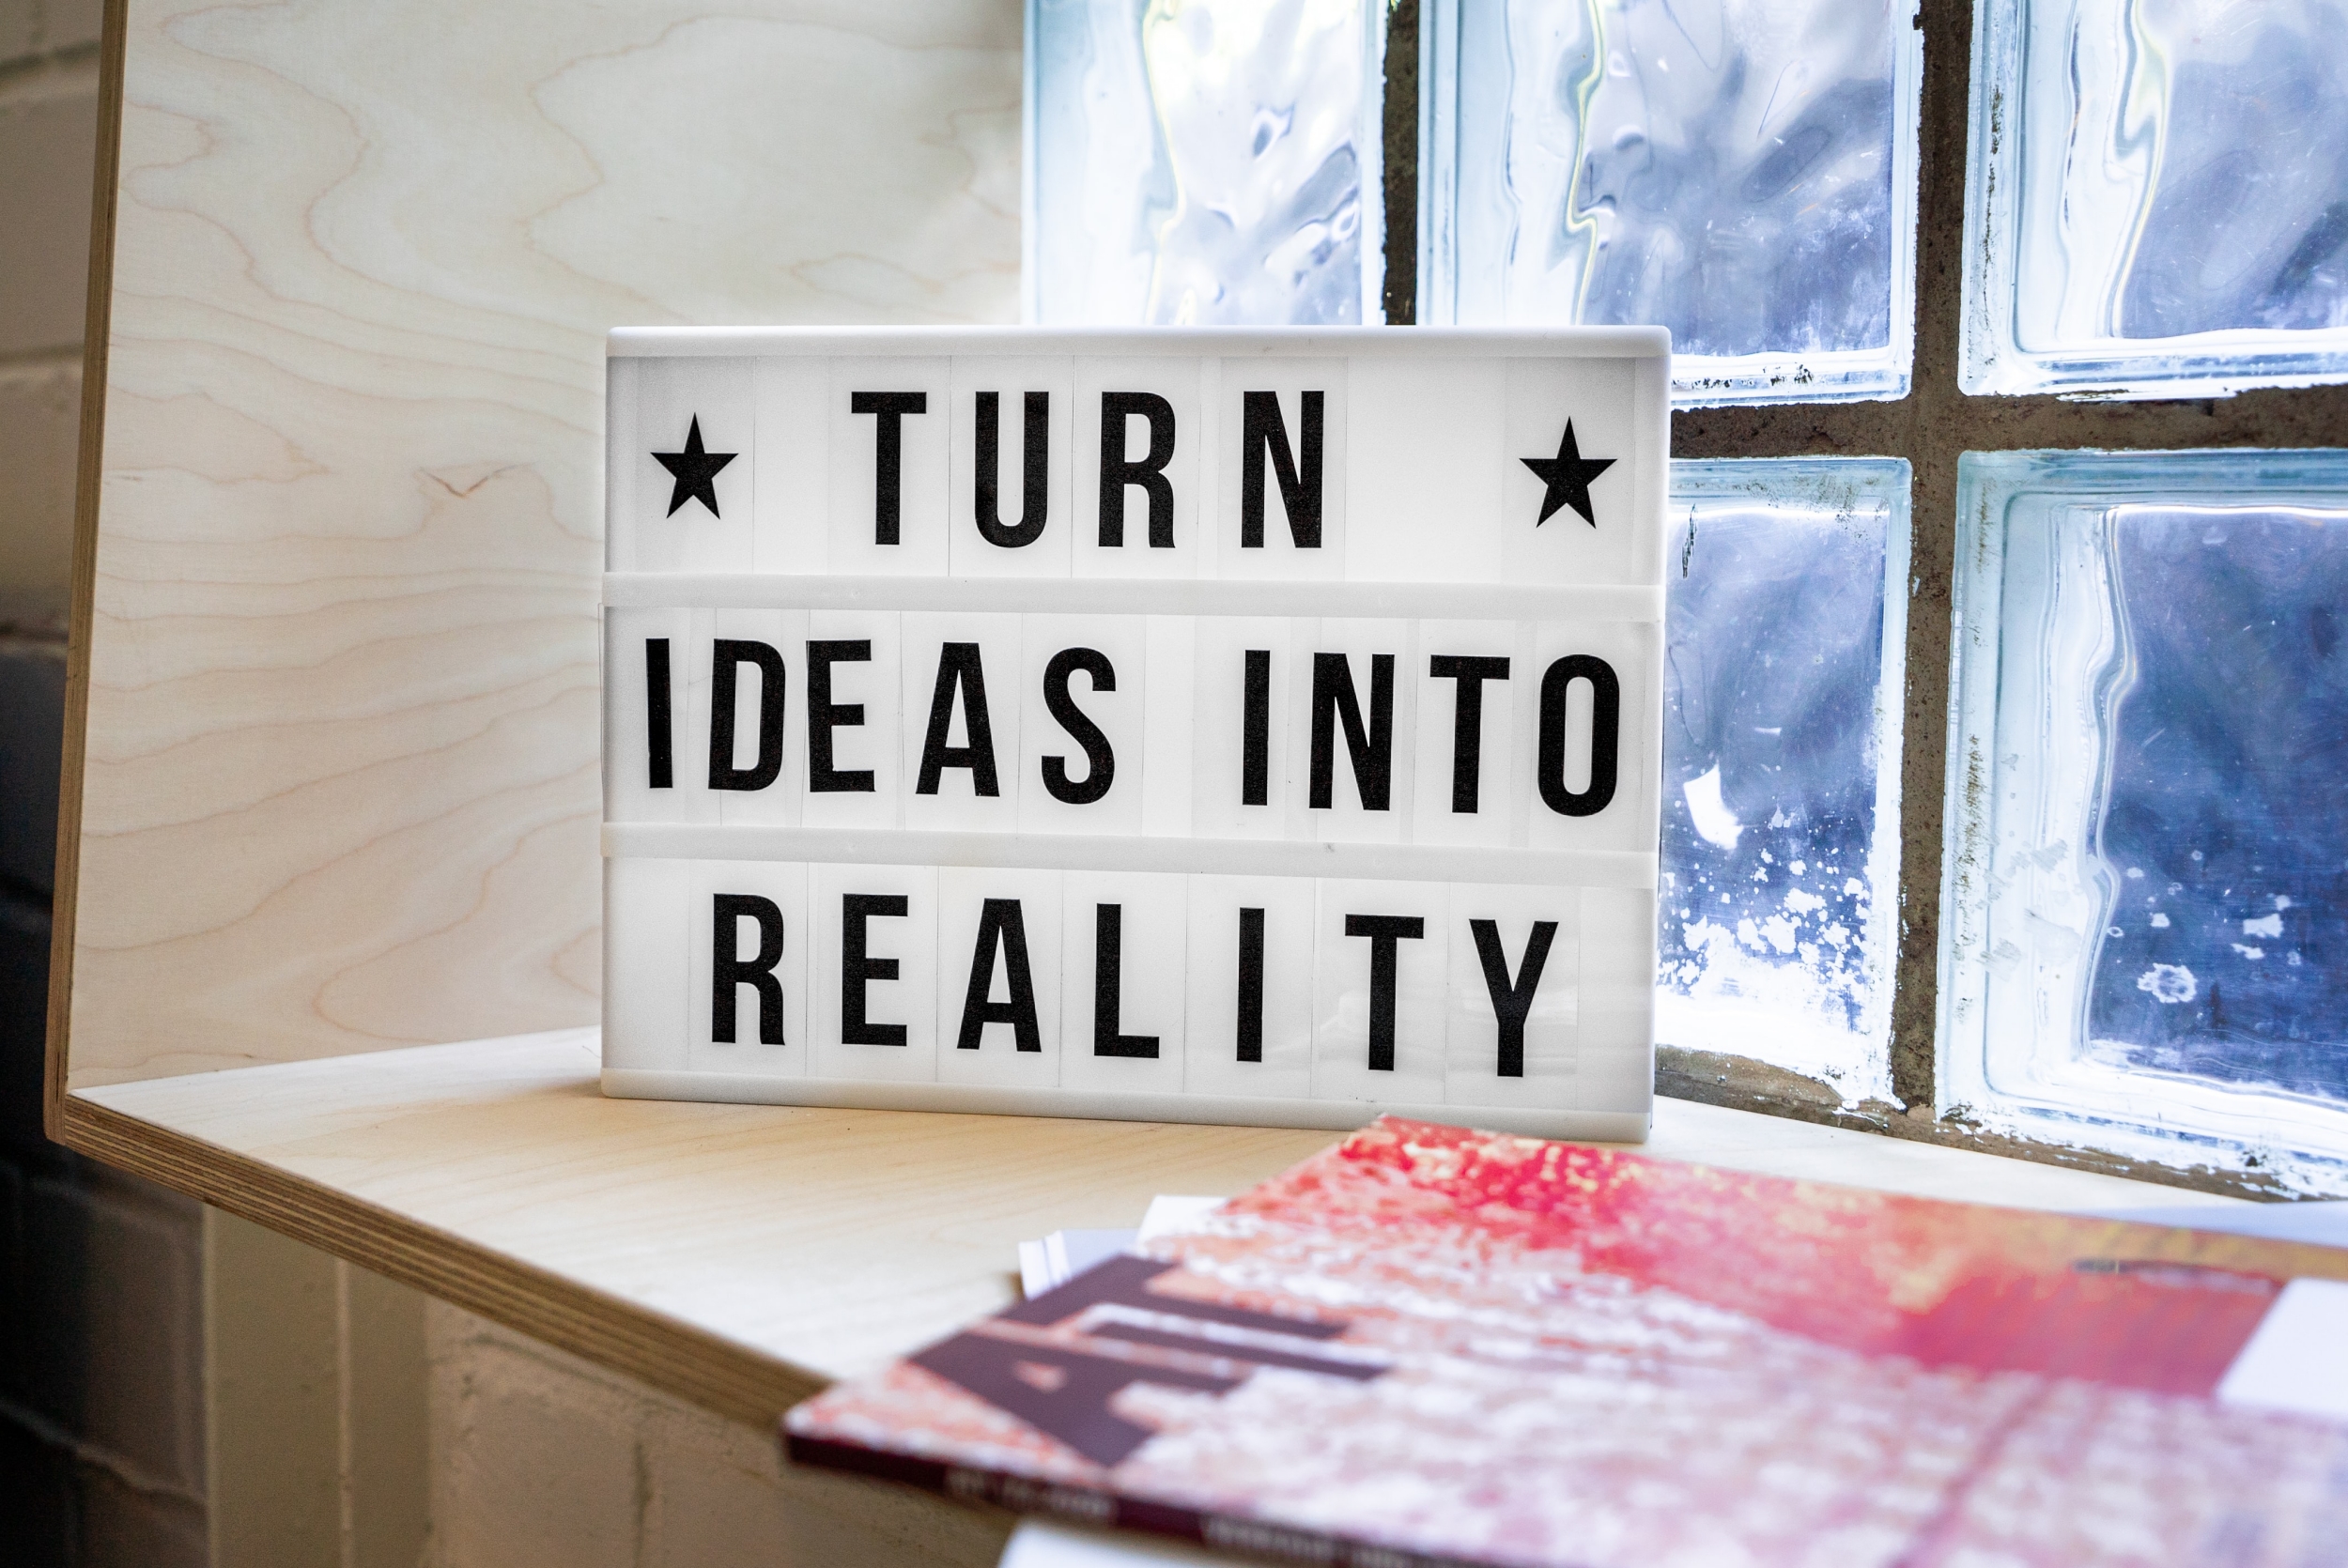 Sign that says "Turn Ideas Into Reality"